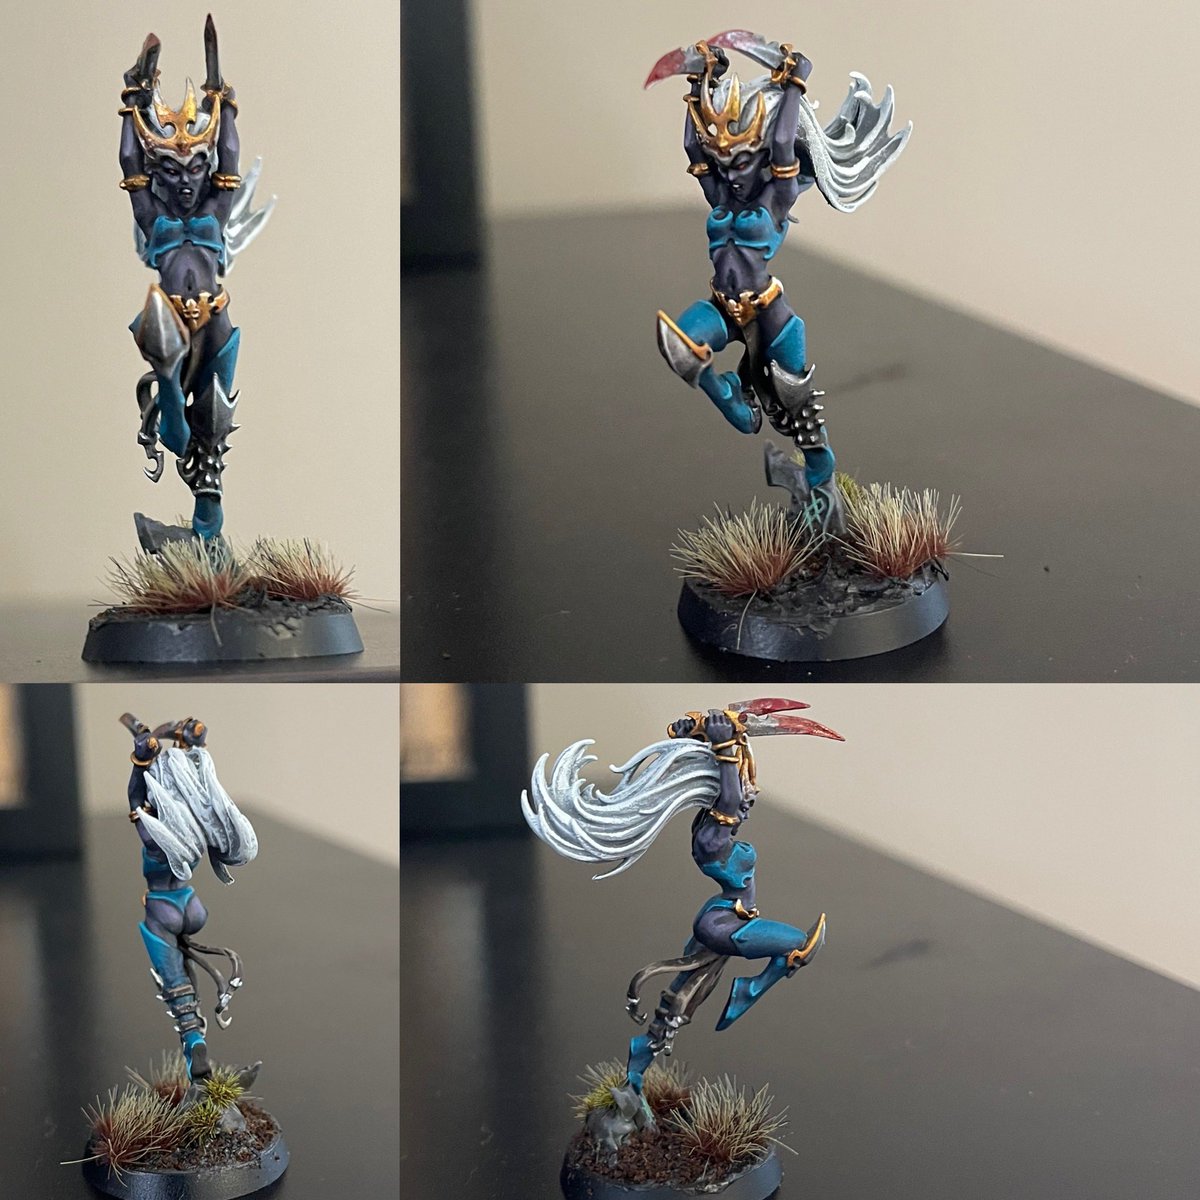 Another crack at Drow skin. I really like how this turned out. #warhammer #warhammercommunity #warhammerpainting #daughtersofkhaine #warmongers